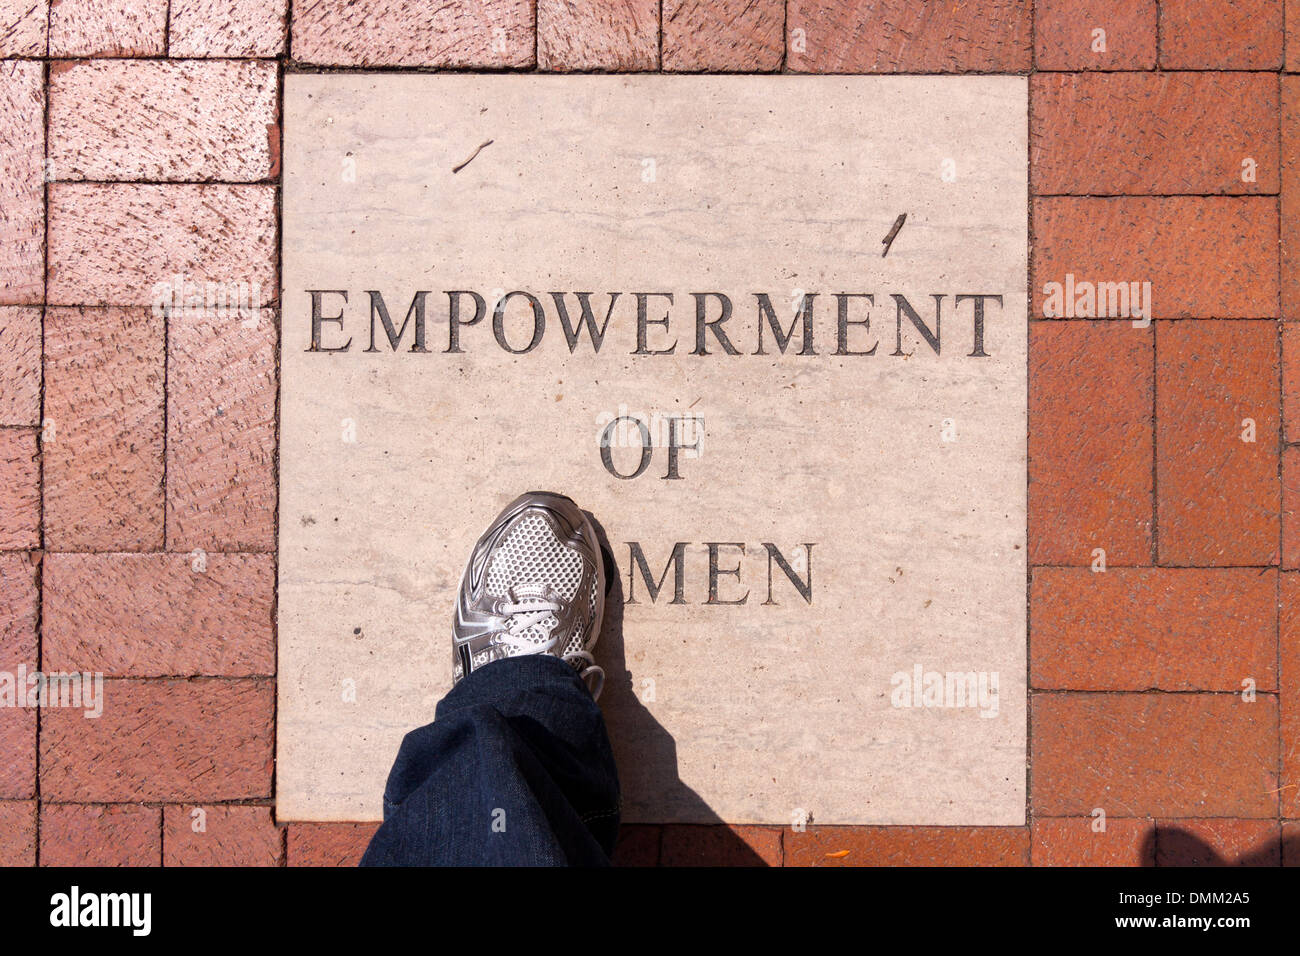 A foot steps on an Empowerment of Women sidewalk stone in Columbus, Ohio. Stock Photo